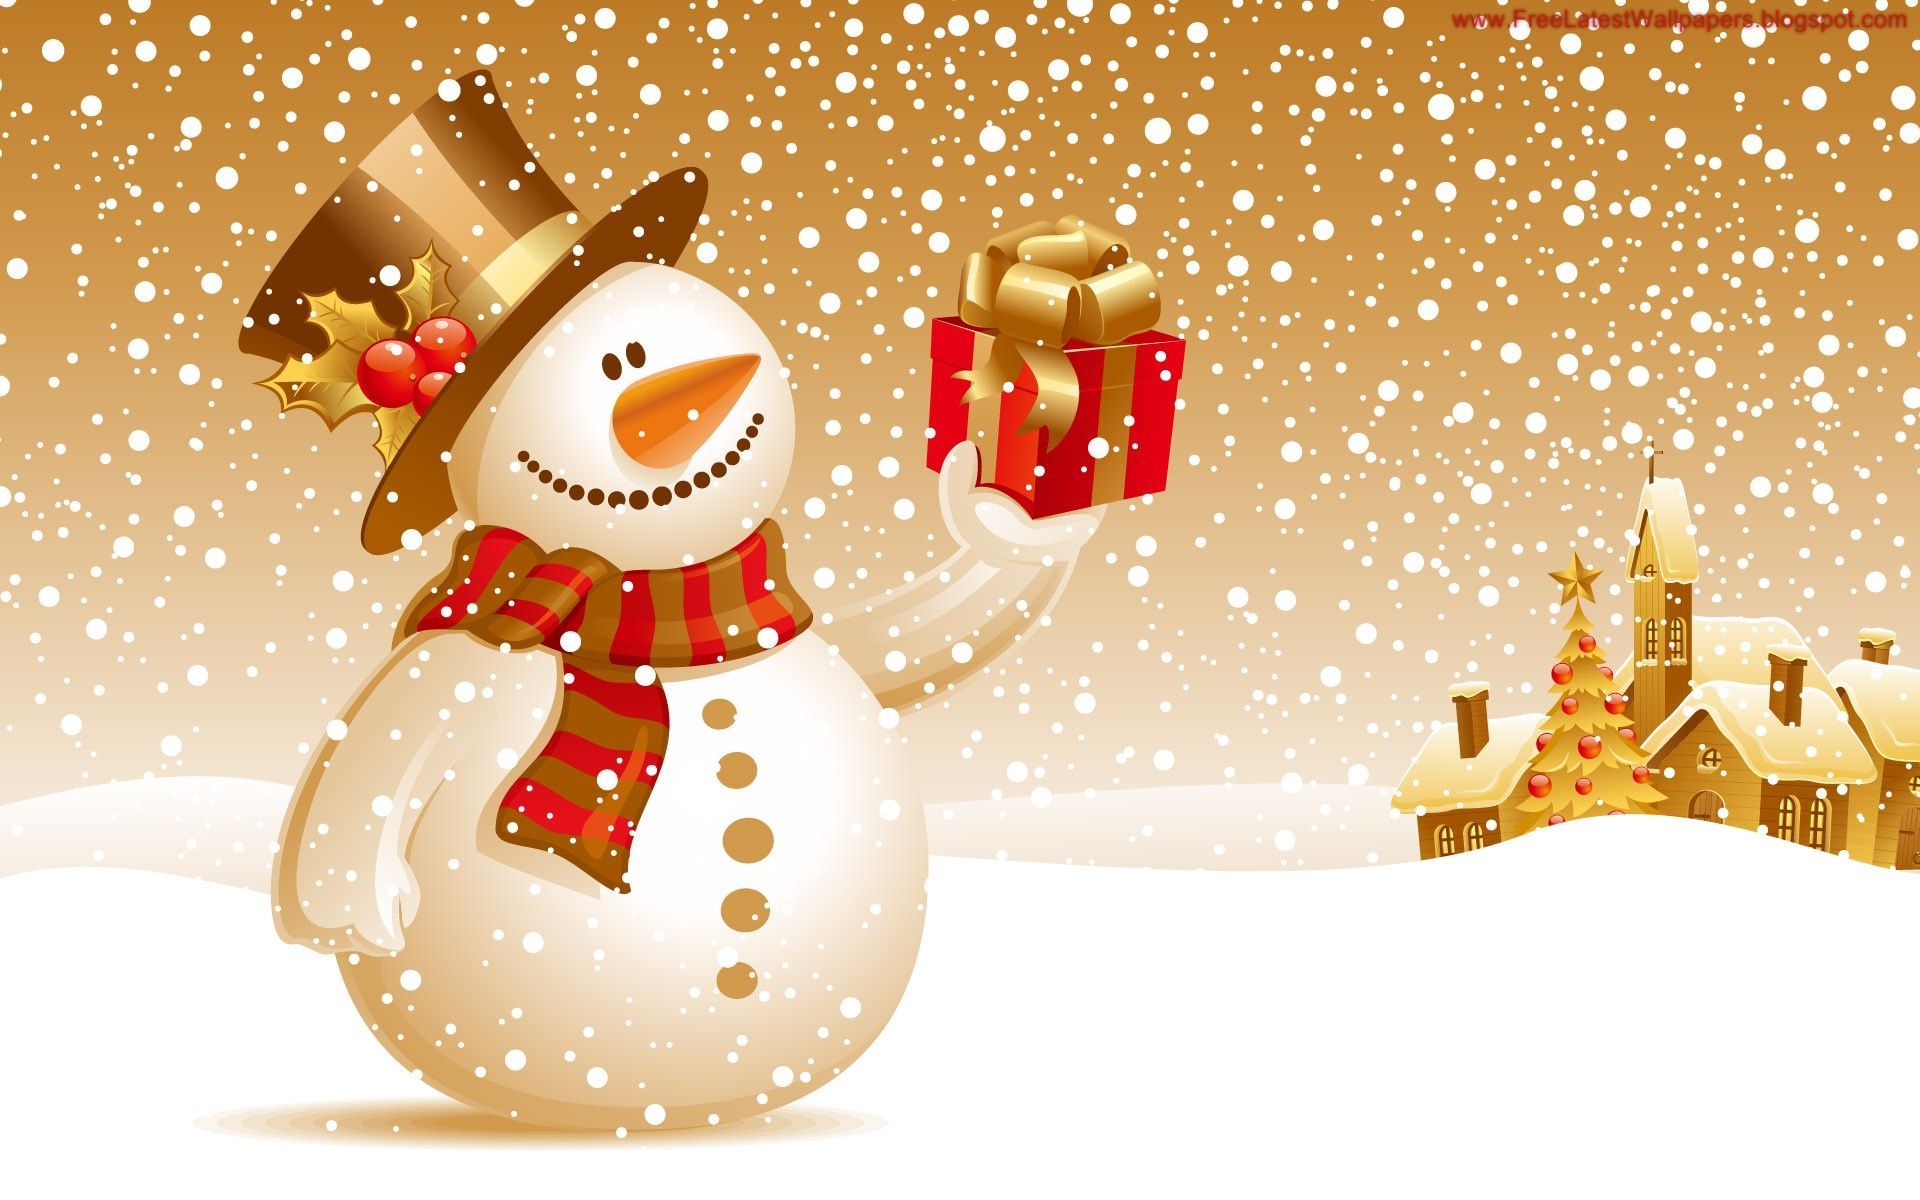 Christmas Archives - Free wallpaper full hd 1080p, high definition